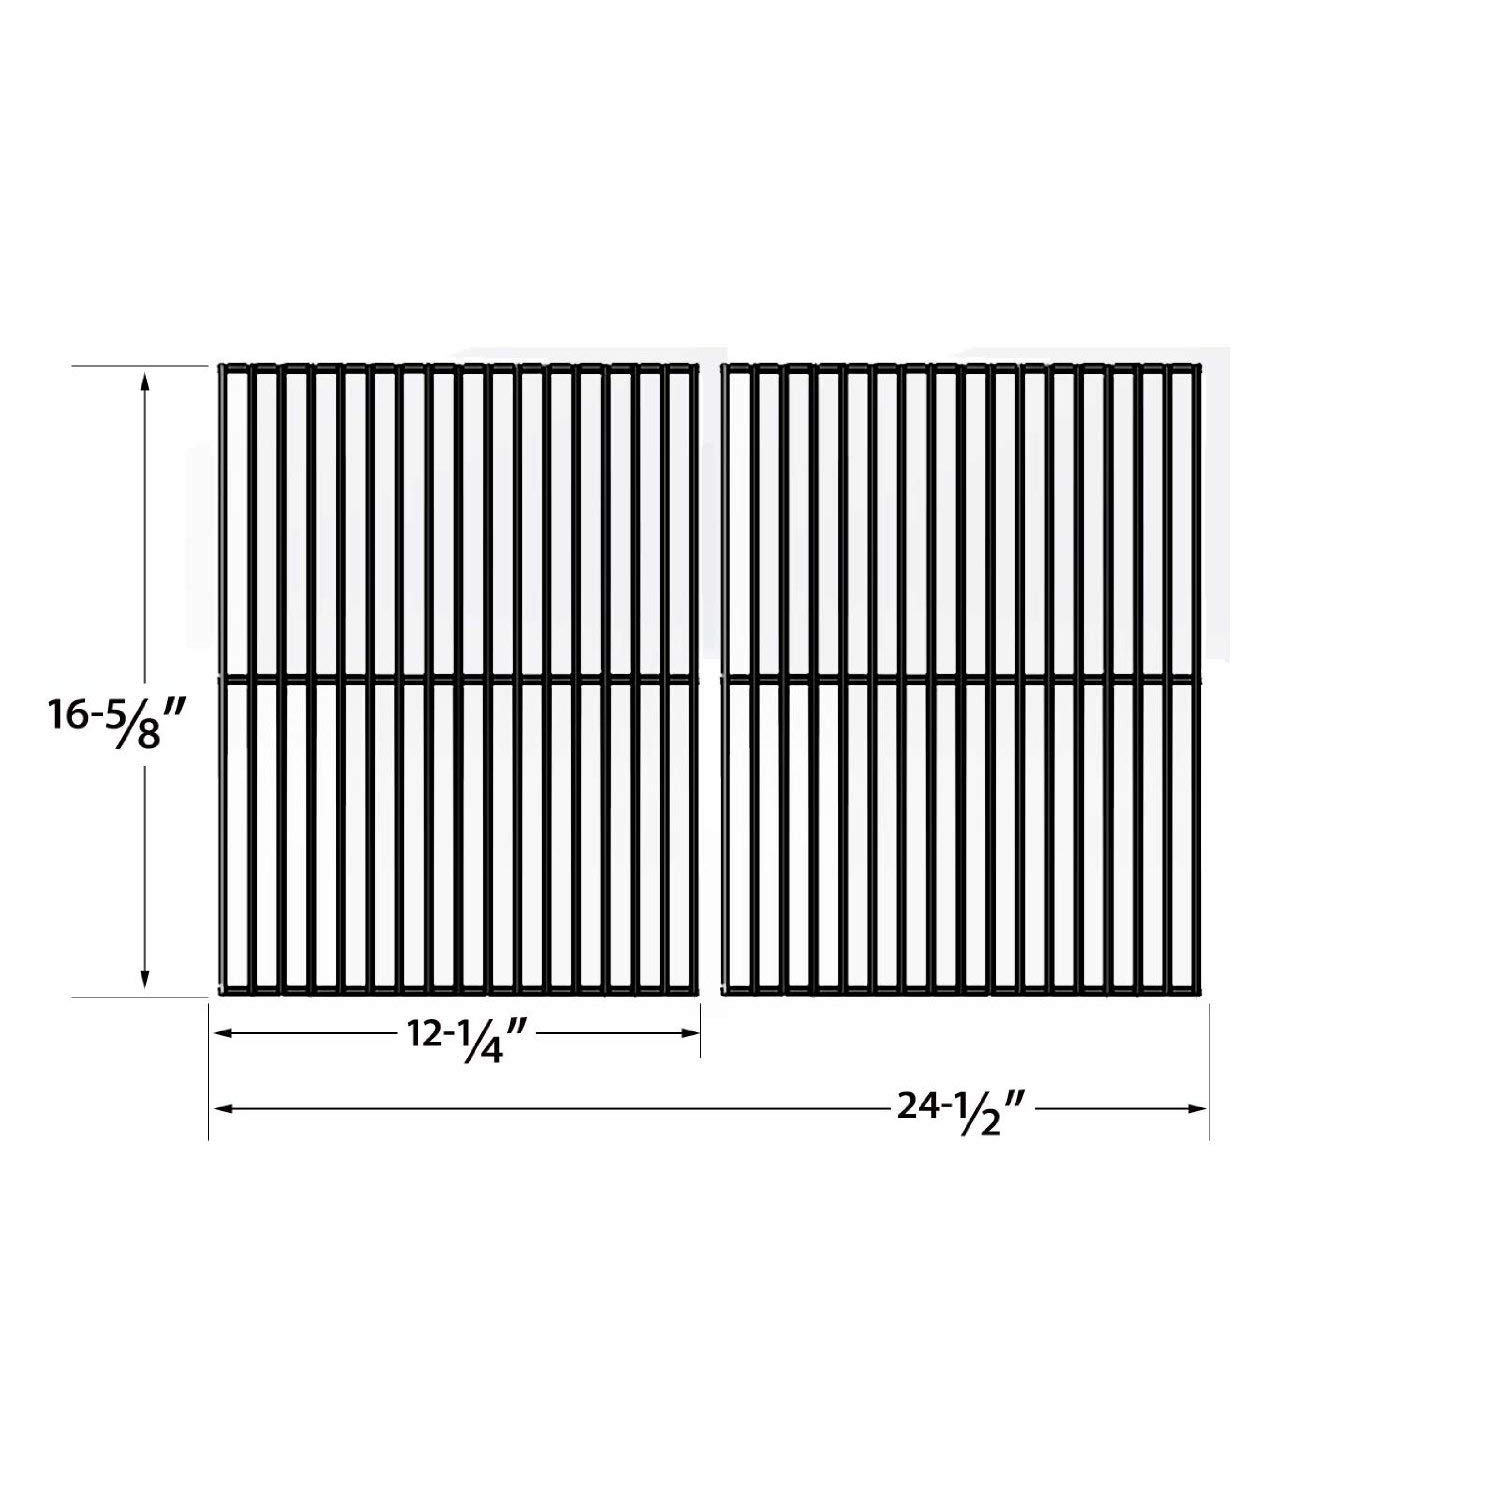 Porcelain Steel Cooking Grid For Centro 2000, 4000, 4000AS, 463252005, 85-1210-2, 85-1250-6, G40202, G40204 Models